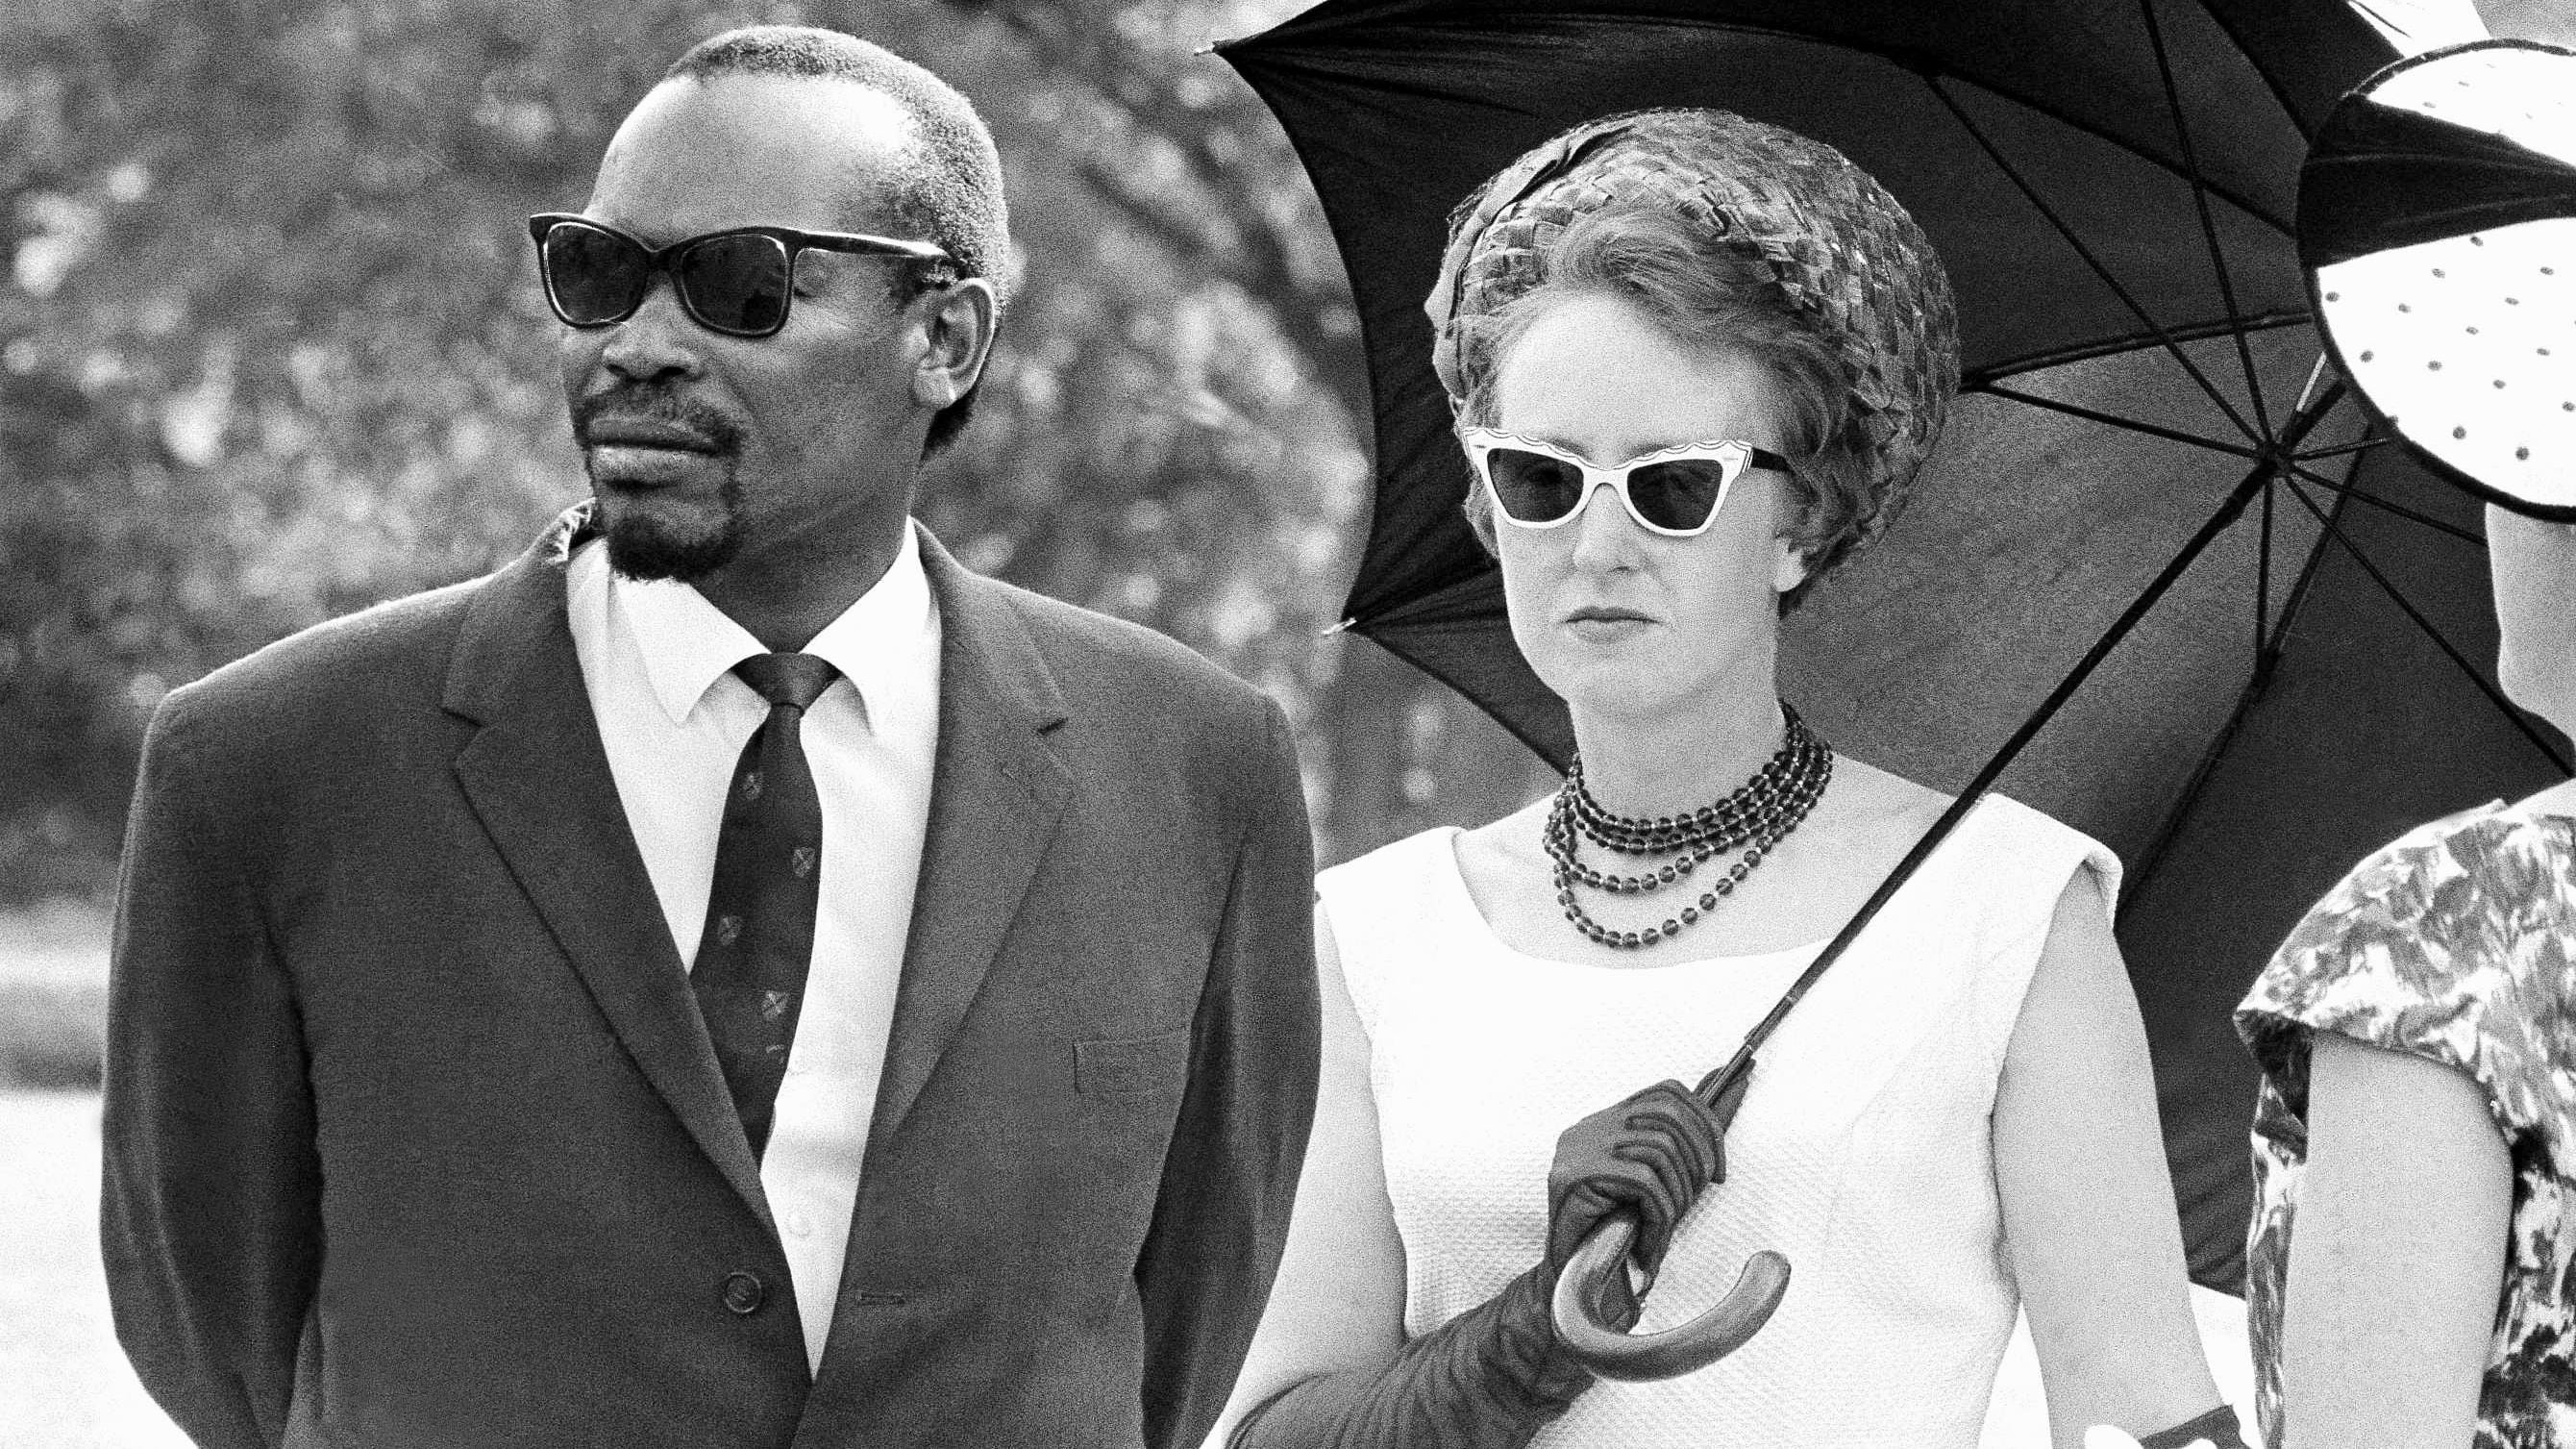 70s 80s Interracial - Interracial couples that changed history